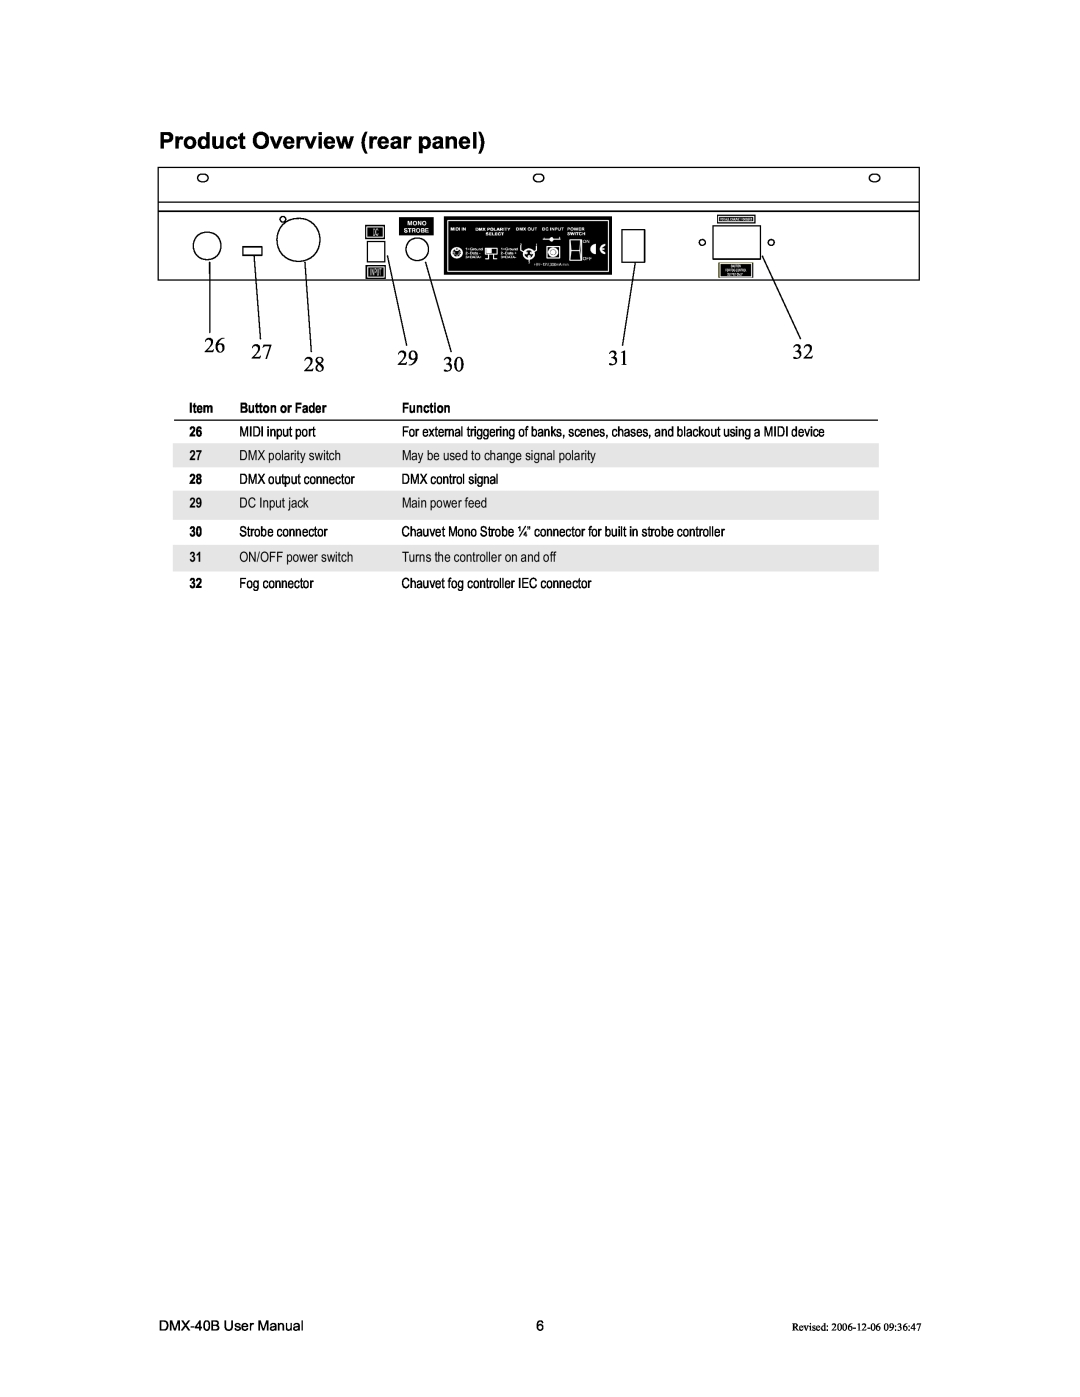 Chauvet DMX-40B user manual Product Overview rear panel, Button or Fader, Function 